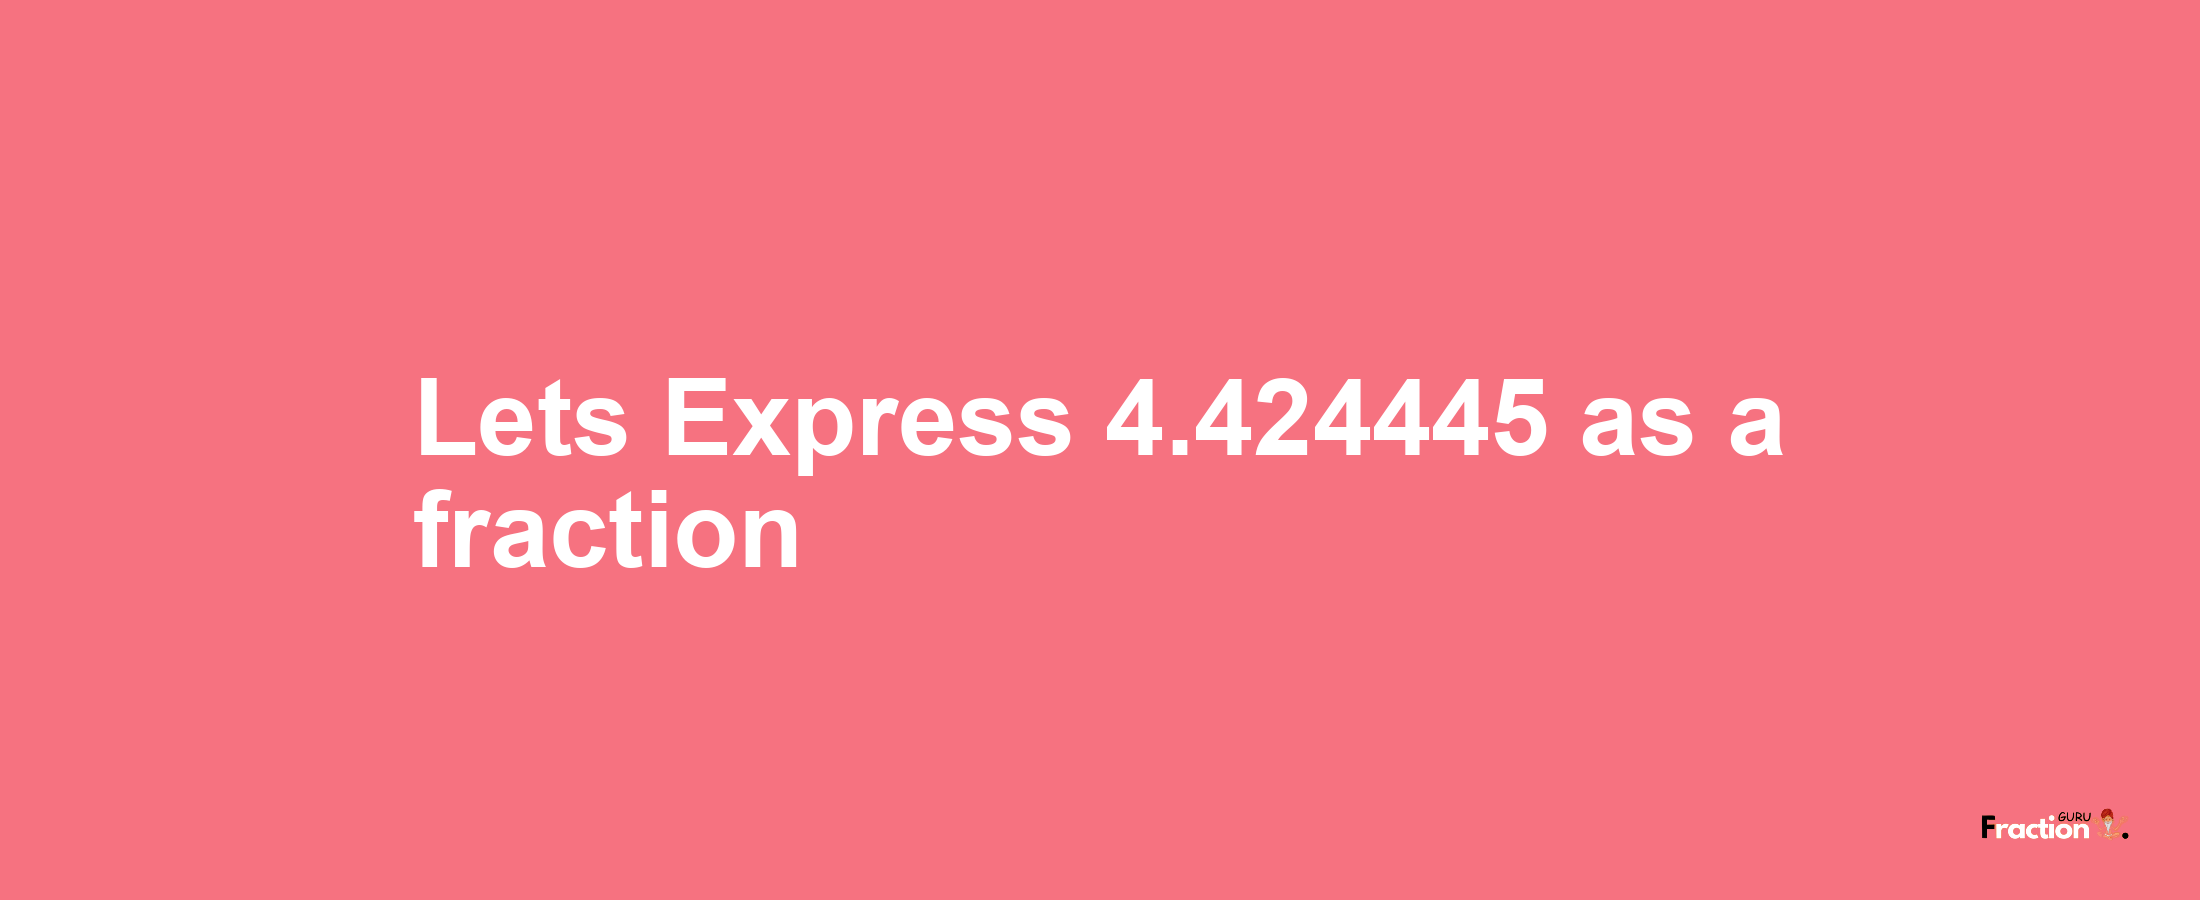 Lets Express 4.424445 as afraction